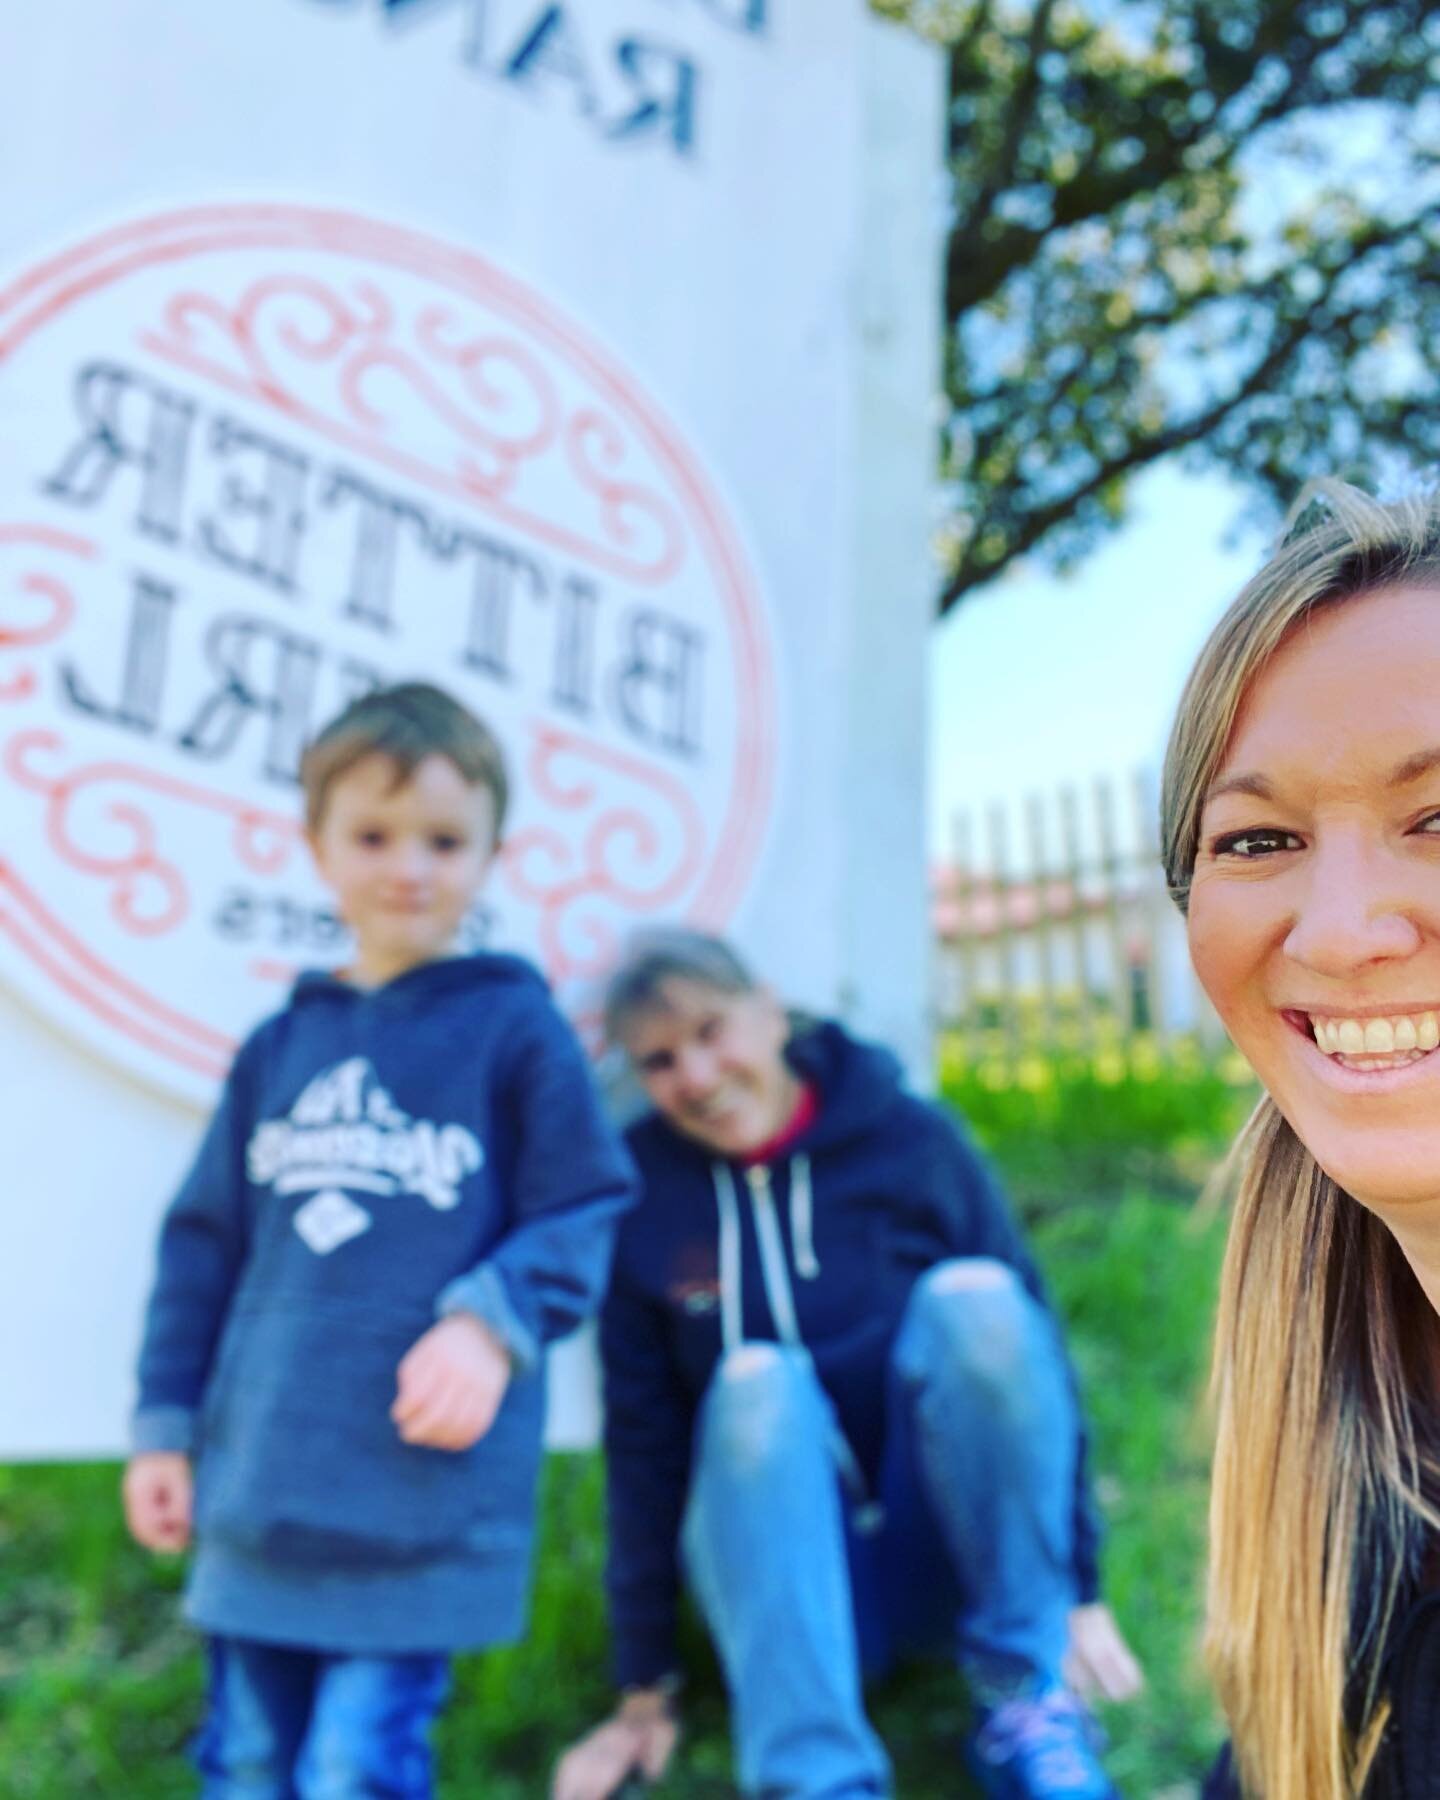 My crew! I couldn&rsquo;t do it without them. My mom and my son Jacob come with me every week to the warehouse to help with production. They mix, strain and chop fresh, homegrown ingredients to make our small batch bitters. A labor of love. 

#bitter